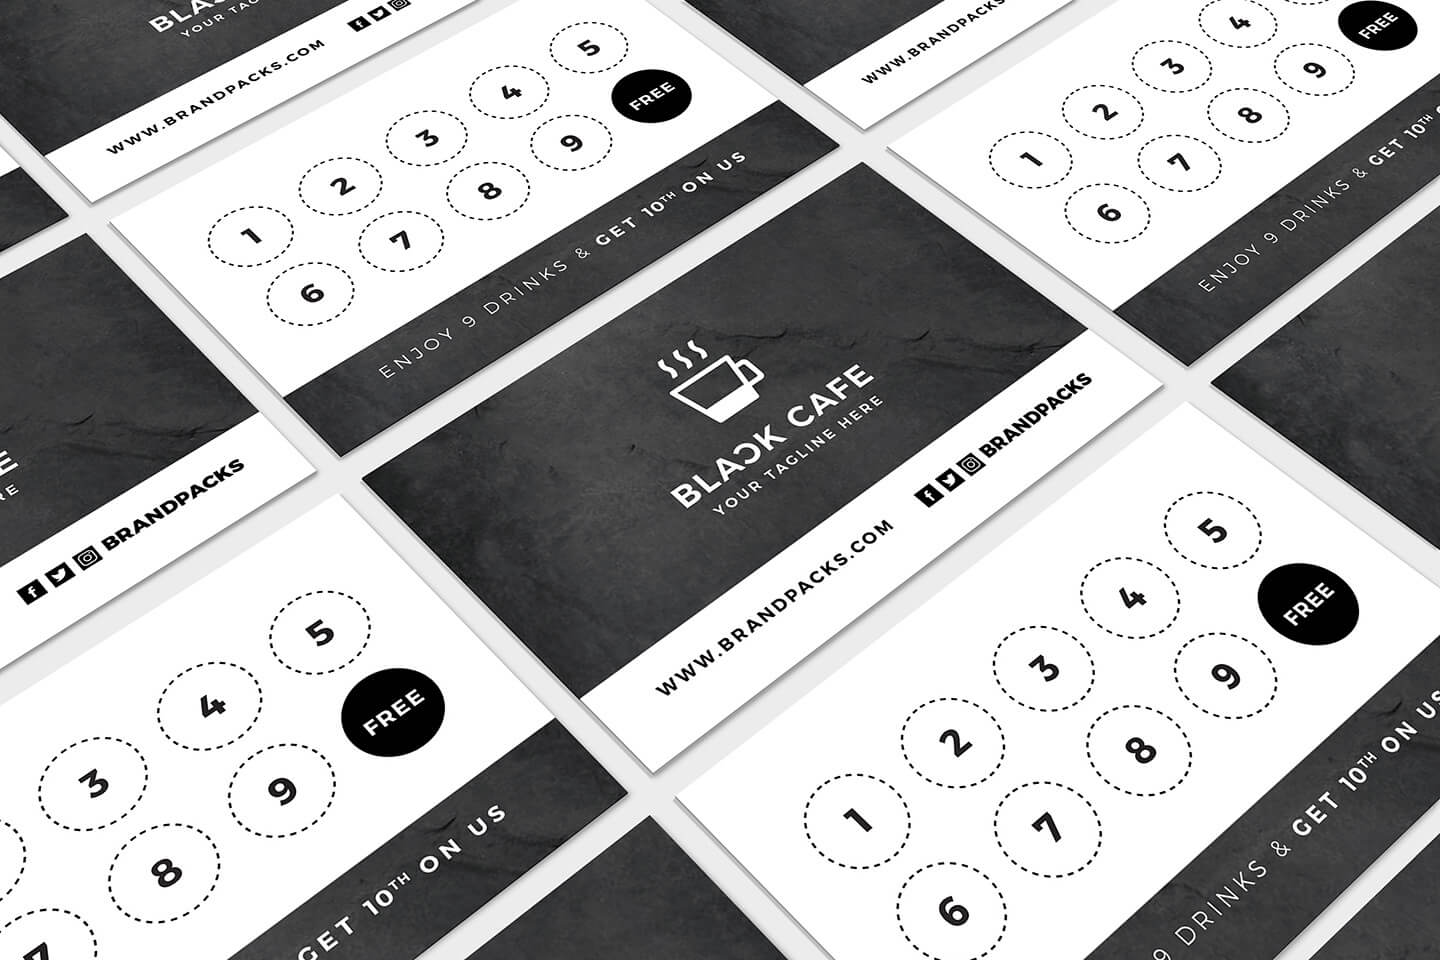 Free Loyalty Card Templates – Psd, Ai & Vector – Brandpacks Within Membership Card Template Free